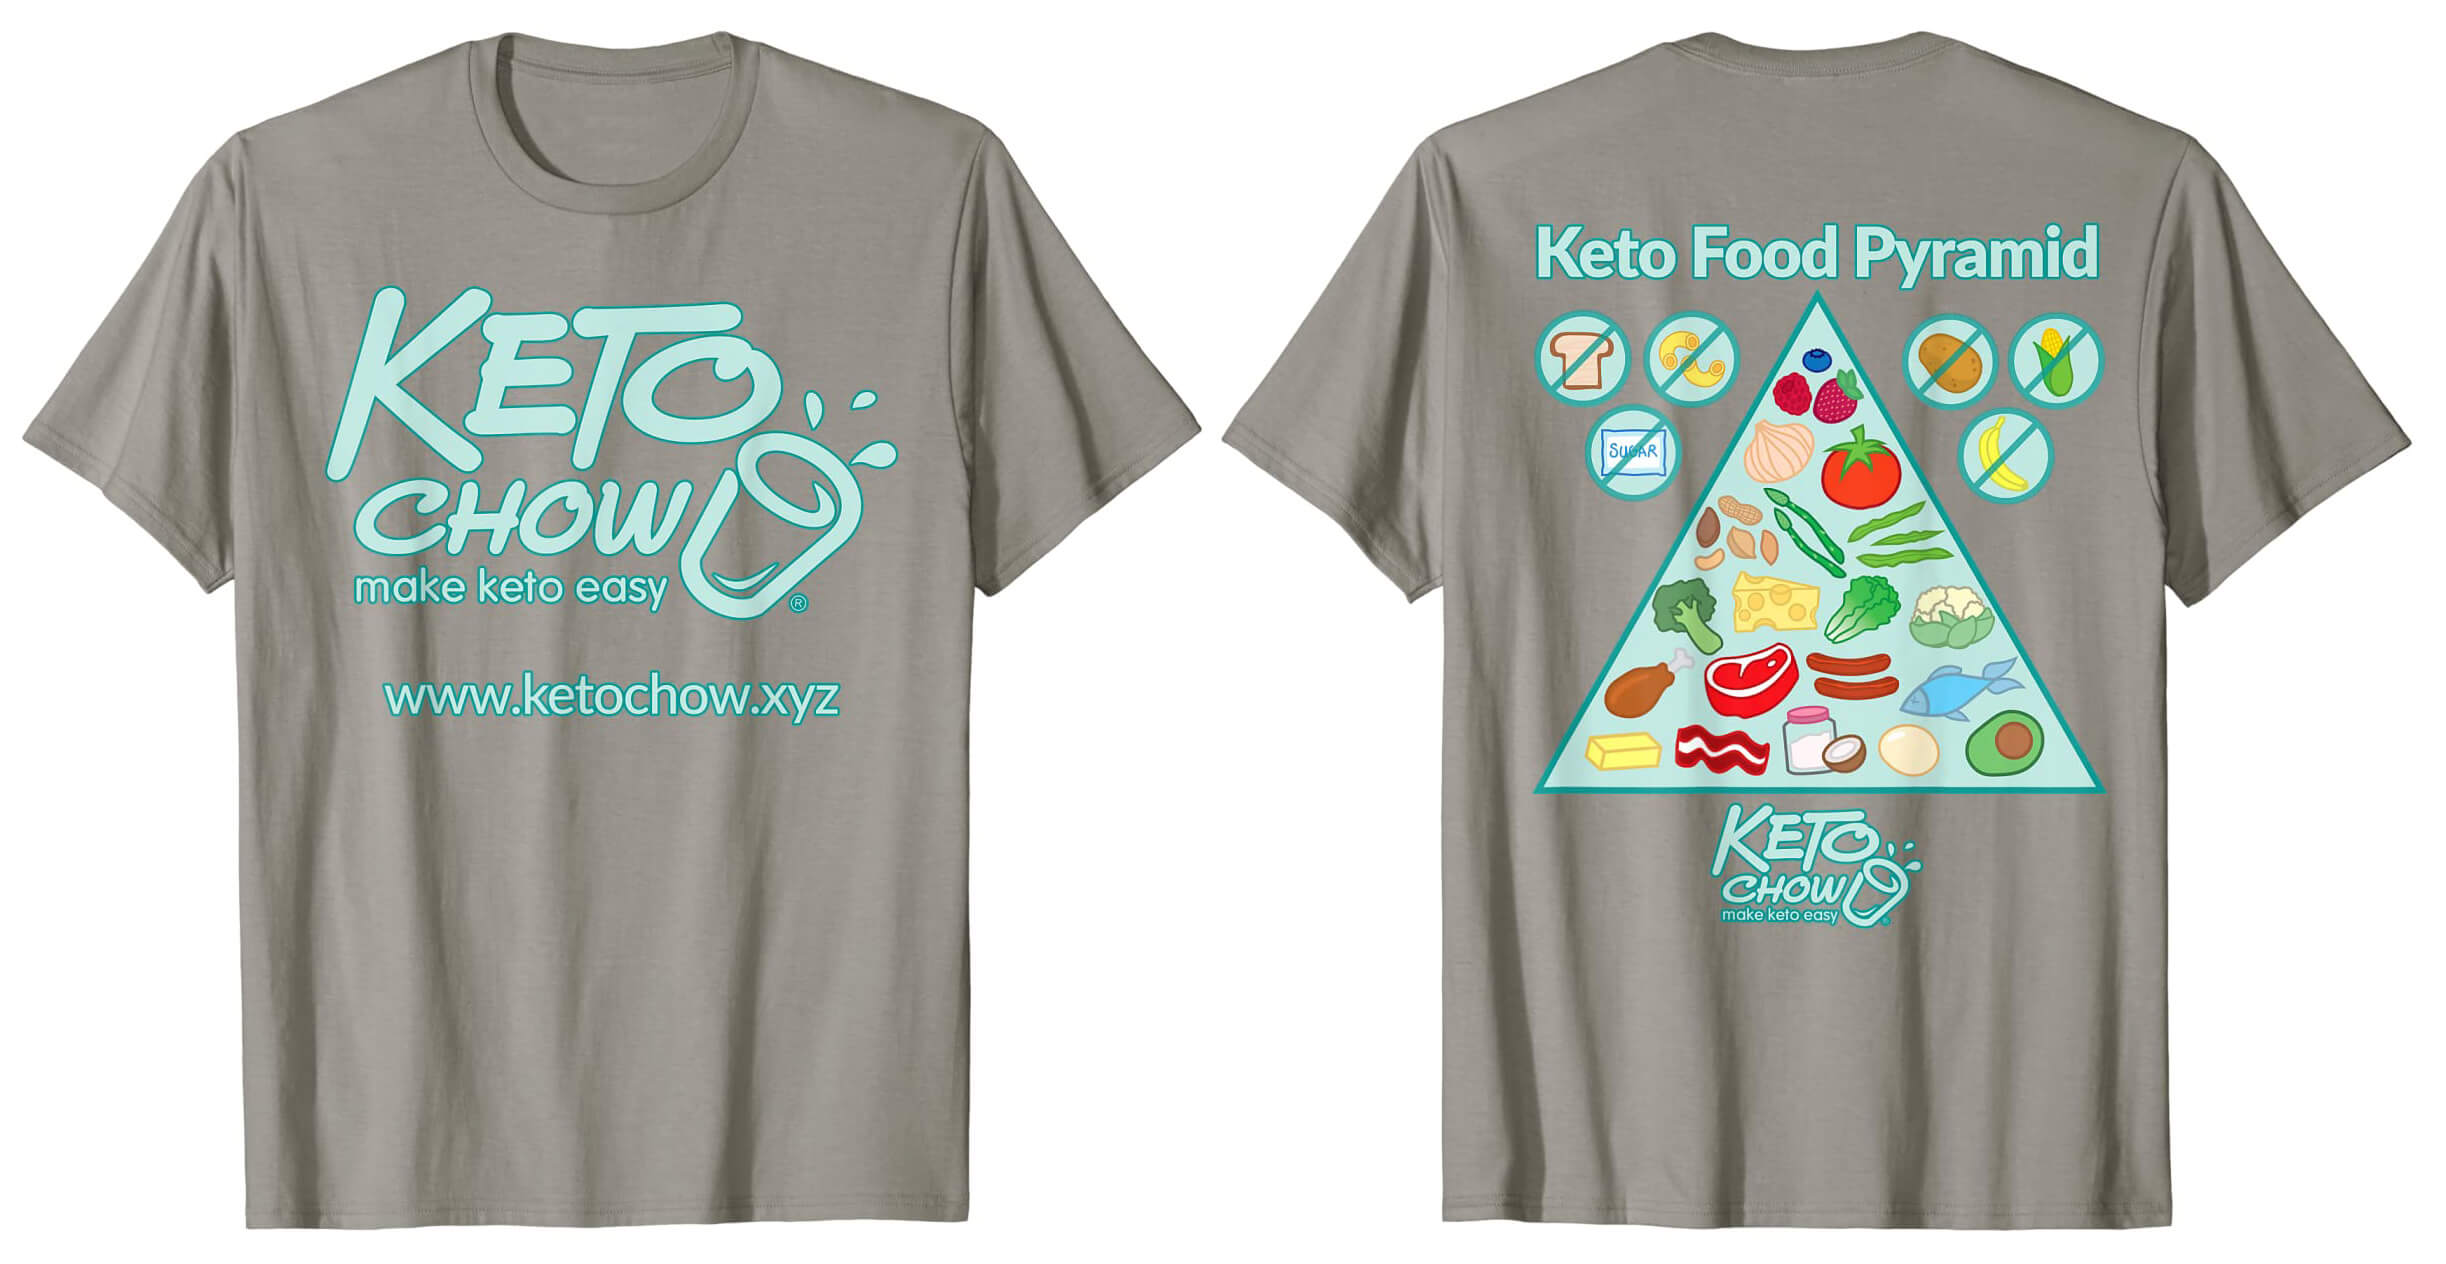 2020 design Keto Chow Shirts front and back images